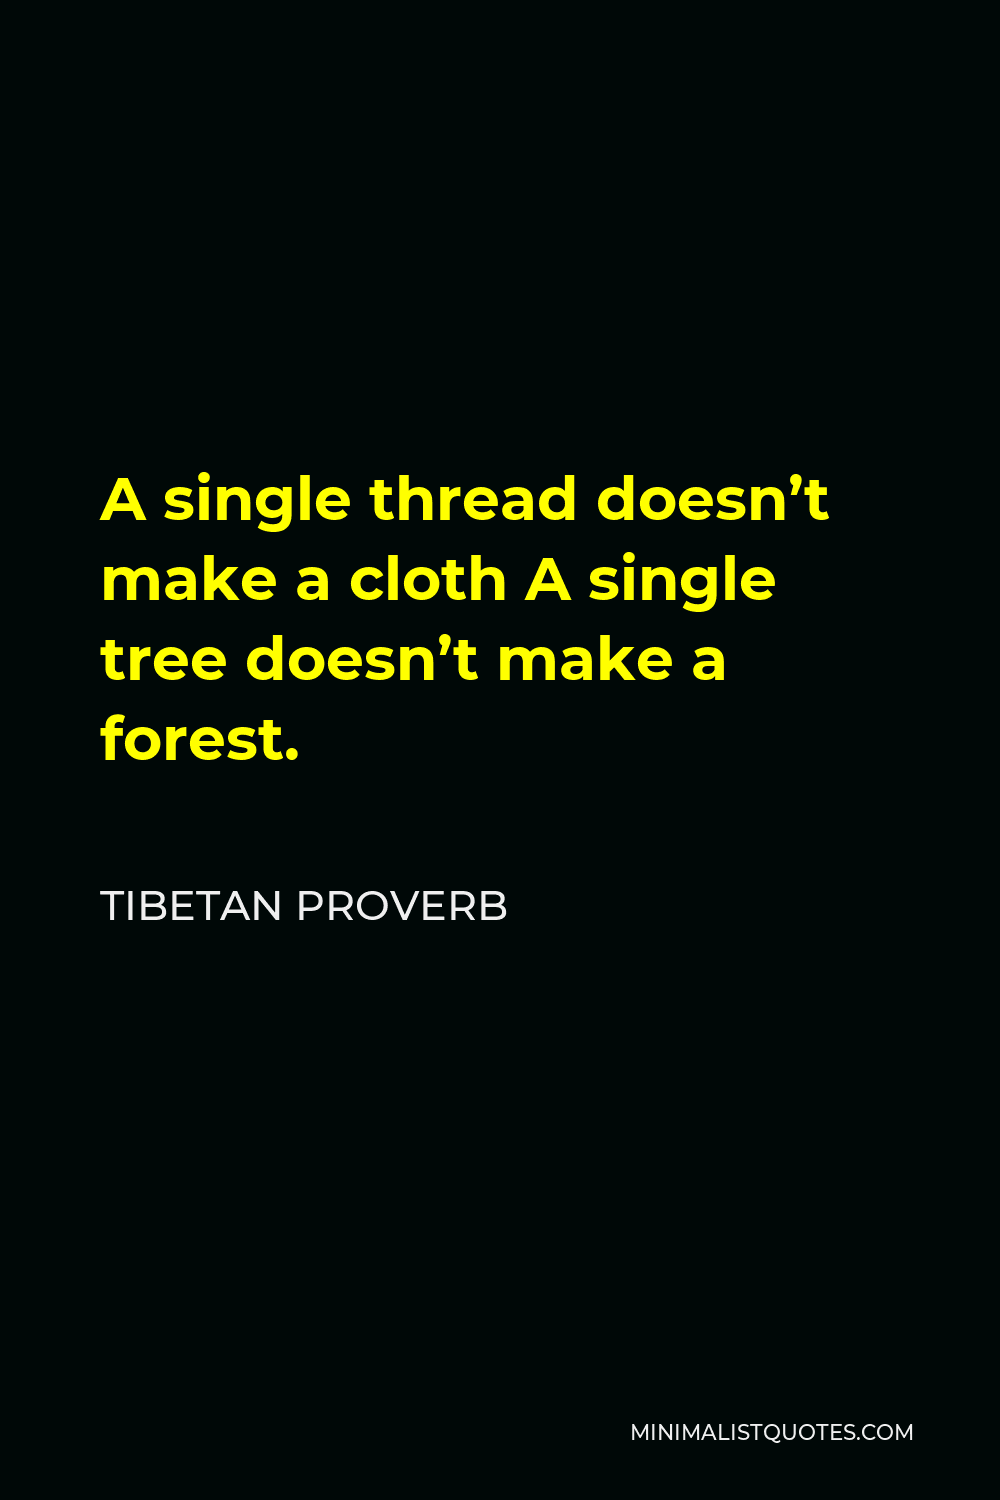 Tibetan Proverb Quote - A single thread doesn’t make a cloth A single tree doesn’t make a forest.